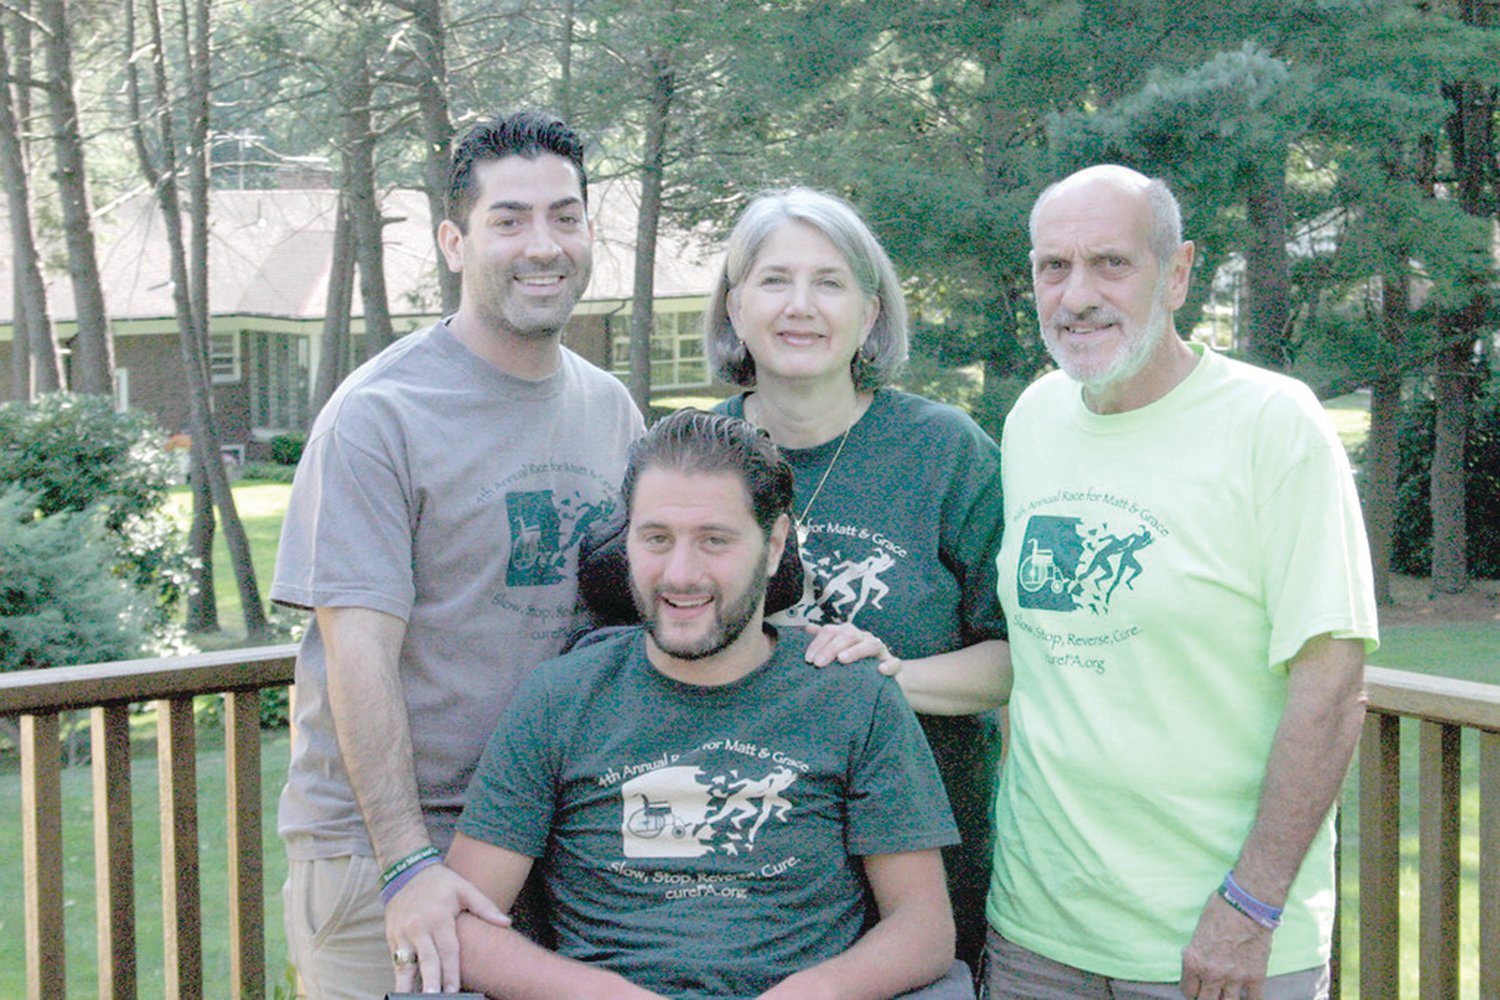 FAMILY: Matt DiIorio (at front), his family and friends believed connecting with the FAcommunity made a major difference in their lives. Pictured, back from left, are Michael Crawley, Sally Ann DiIorio and Jack DiIorio. (Cranston Herald file photo)